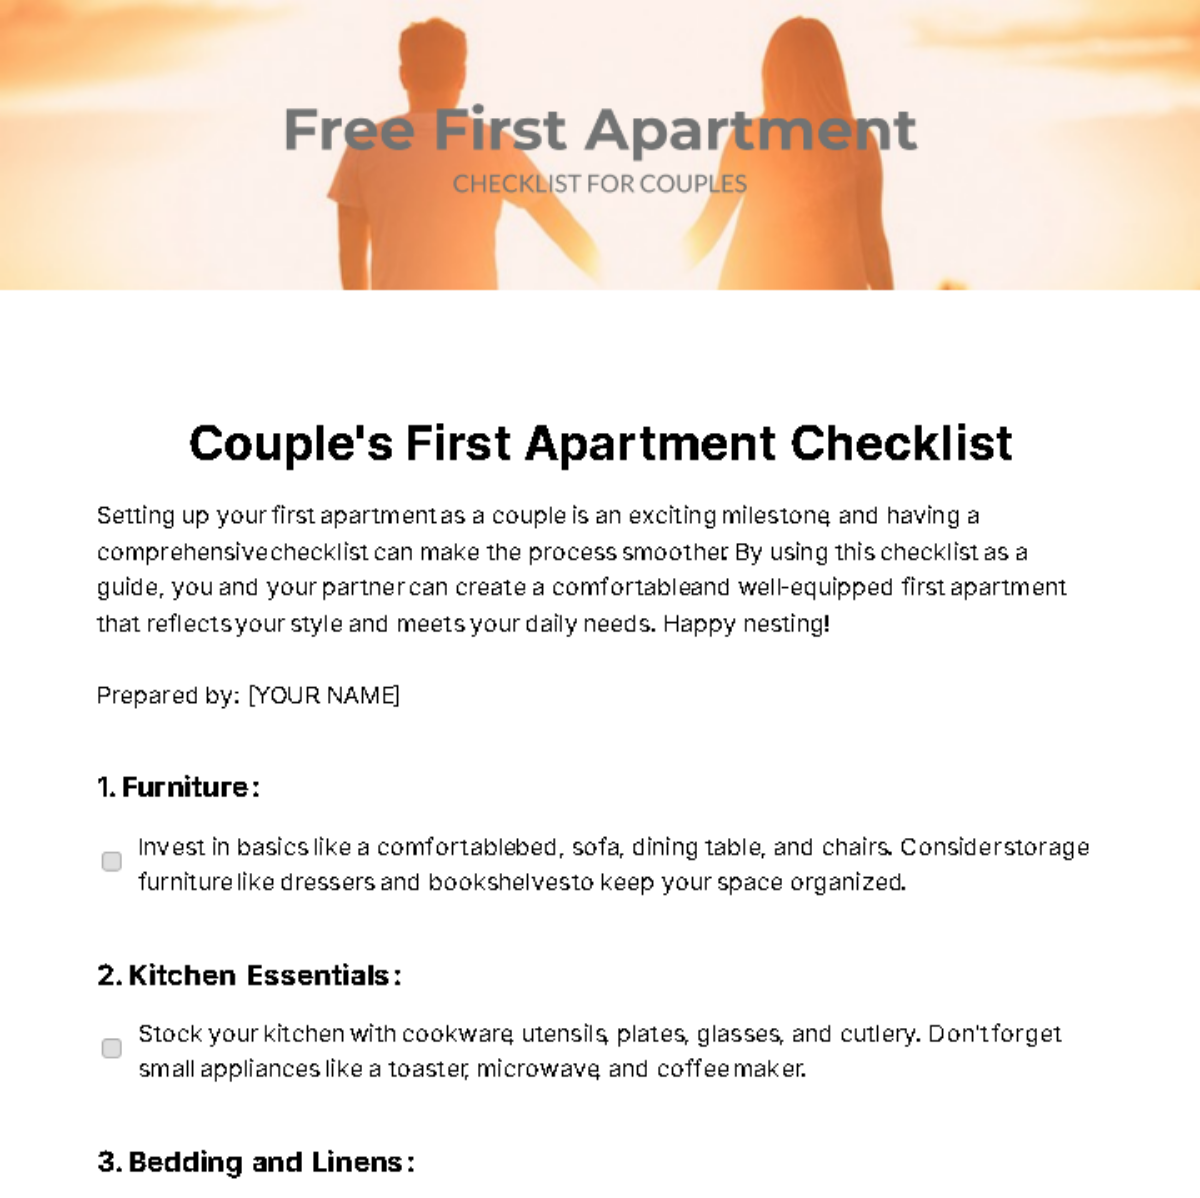 First Apartment Checklist For Couples Template